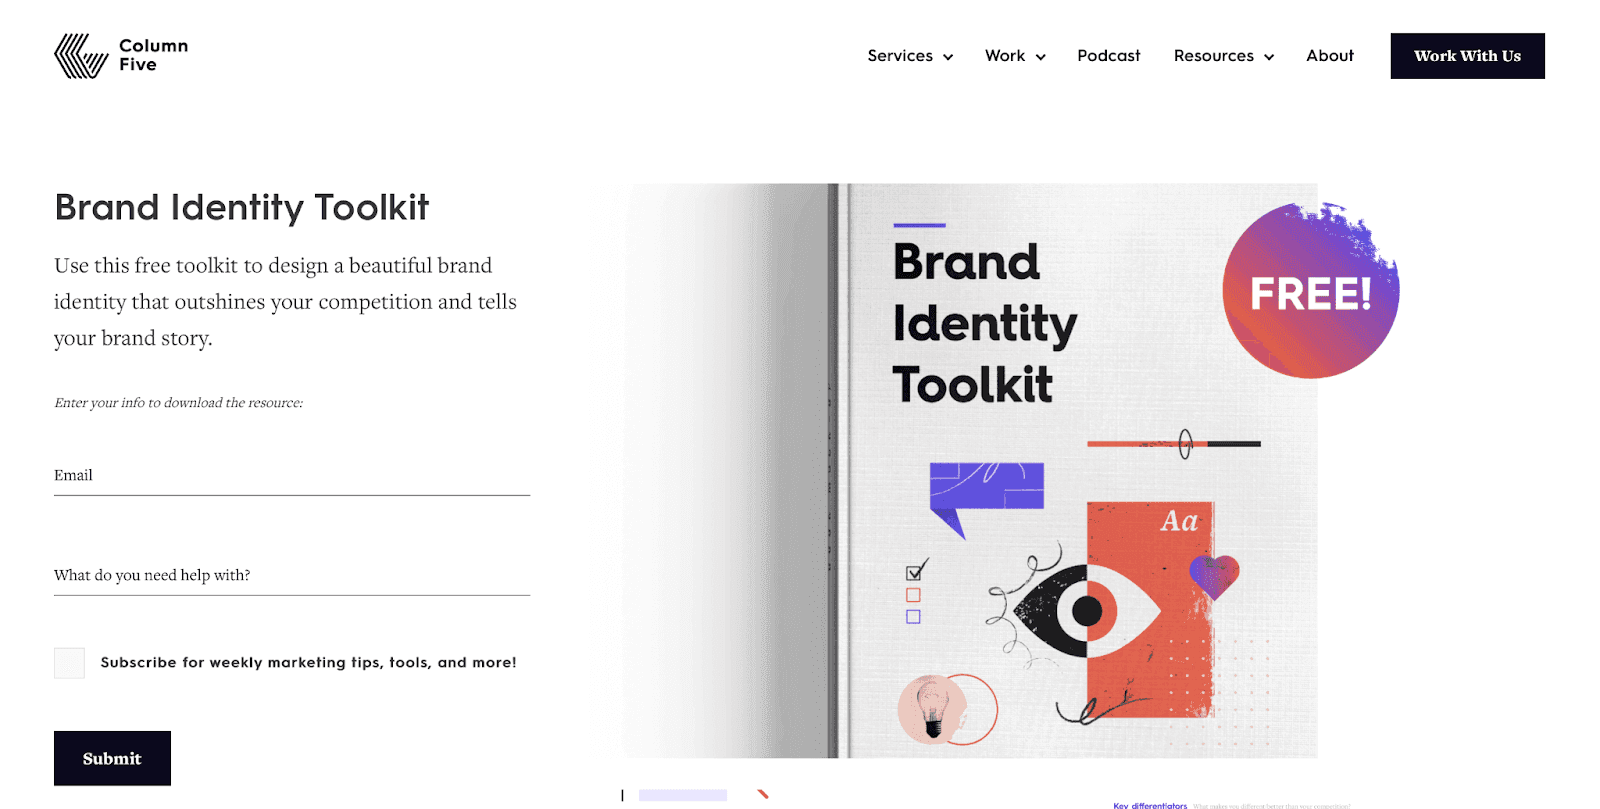 Use this free toolkit to design a beautiful brand identity that outshines your competition and tells your brand story